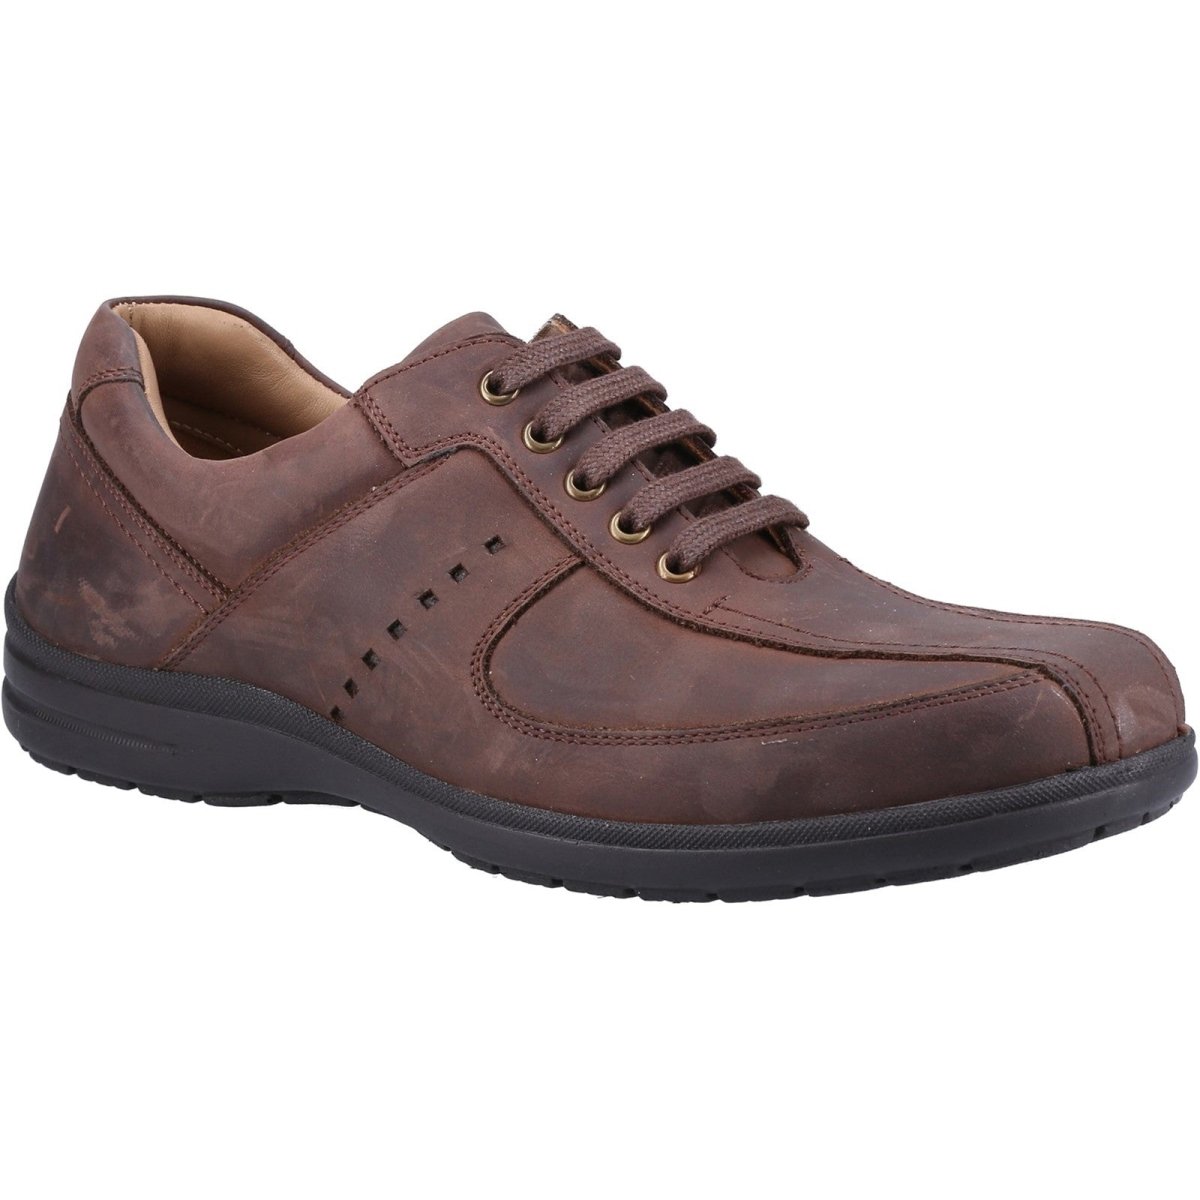 Fleet & Foster Bob Mens Smooth Leather Casual Shoes - Shoe Store Direct